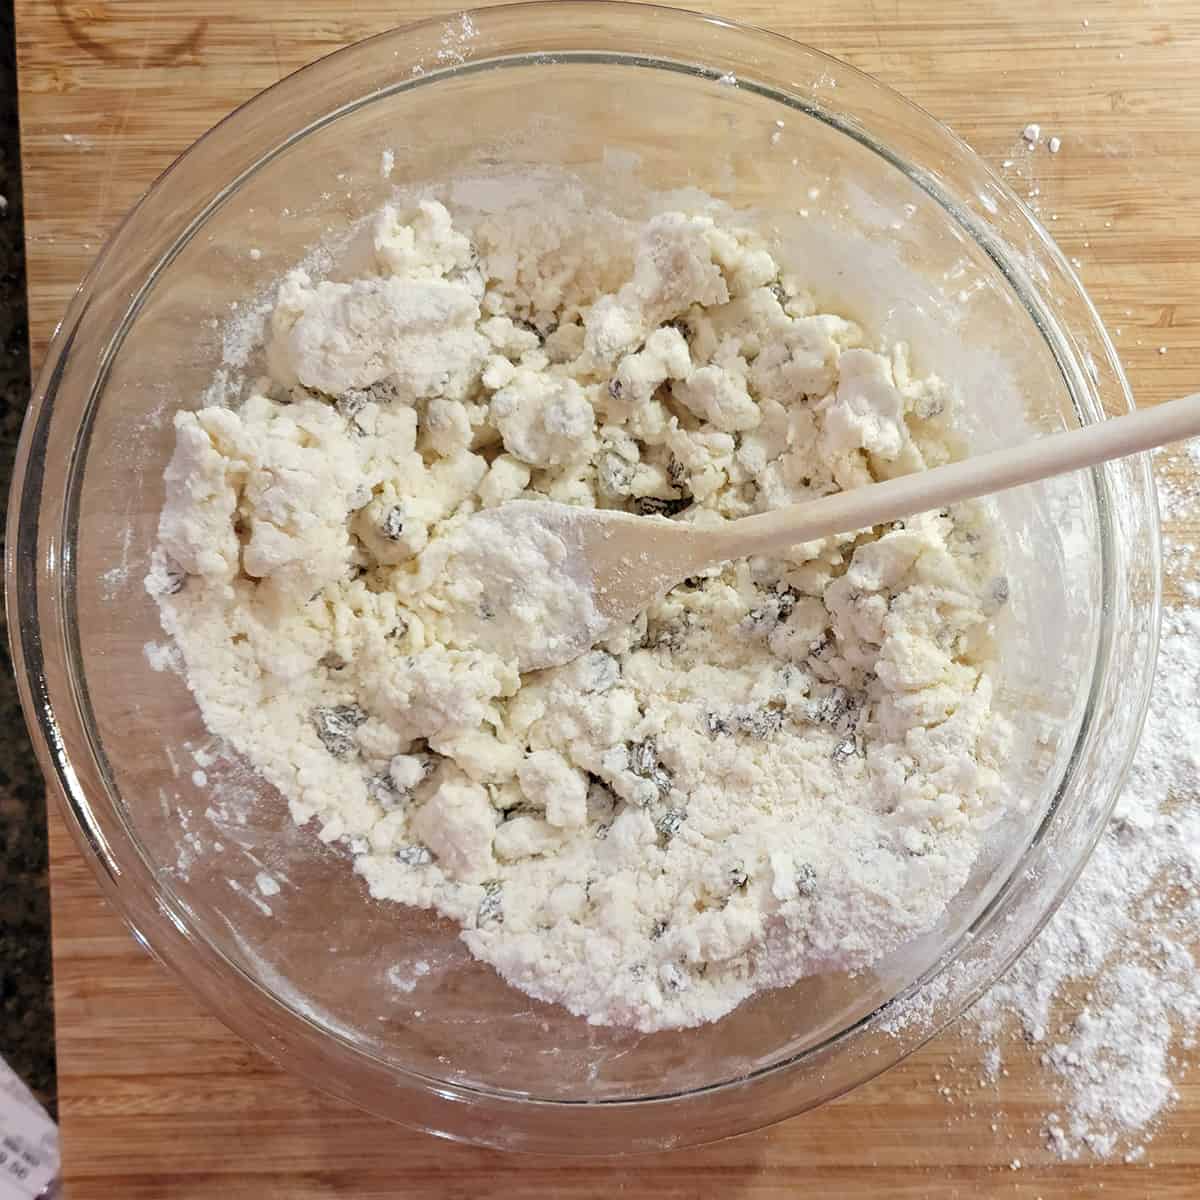 Cream added to mixture in bowl.